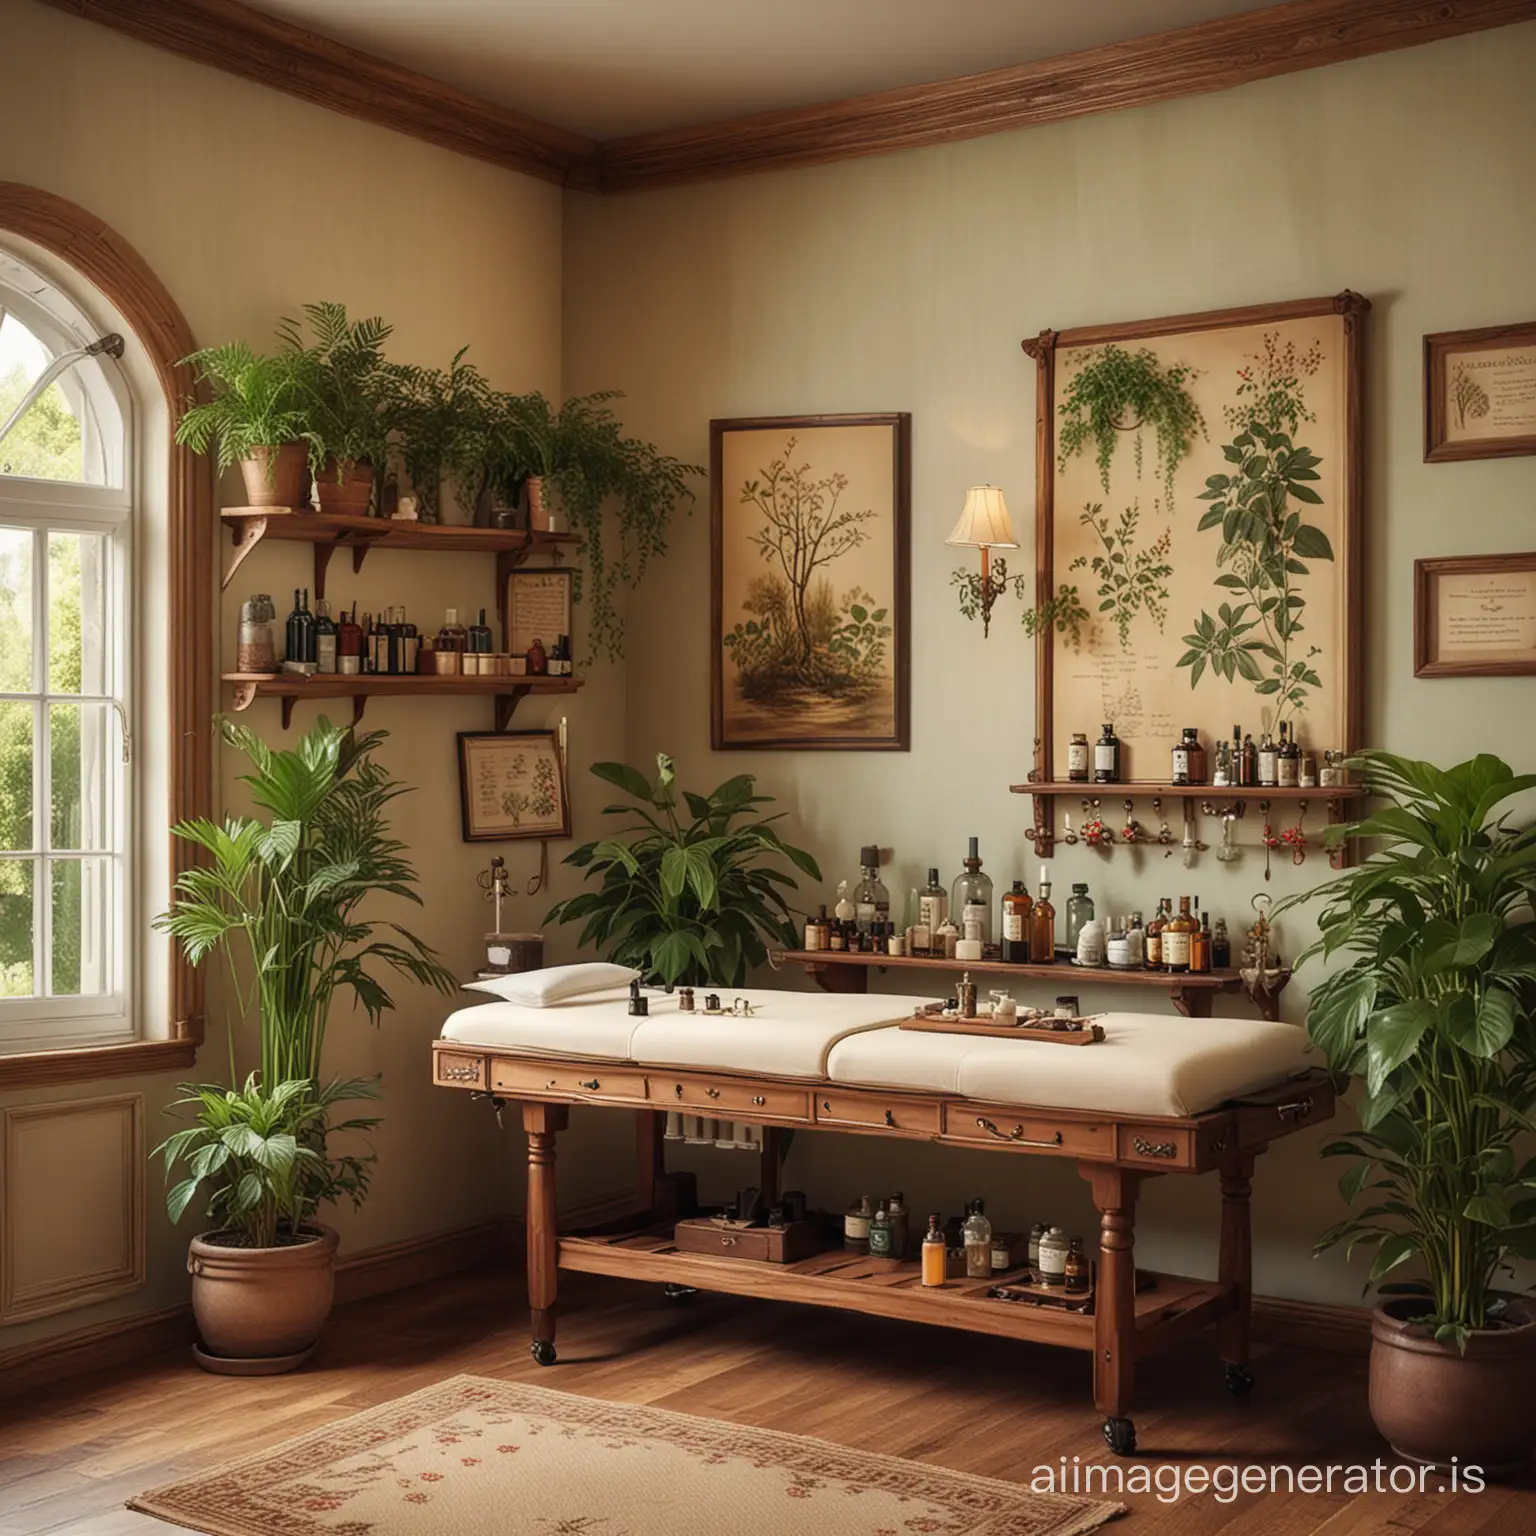 medical treatment room, fantasy art, friendly with two plants and only one treatment table with wooden frame, acupboard with potions, room is in an English Manor style